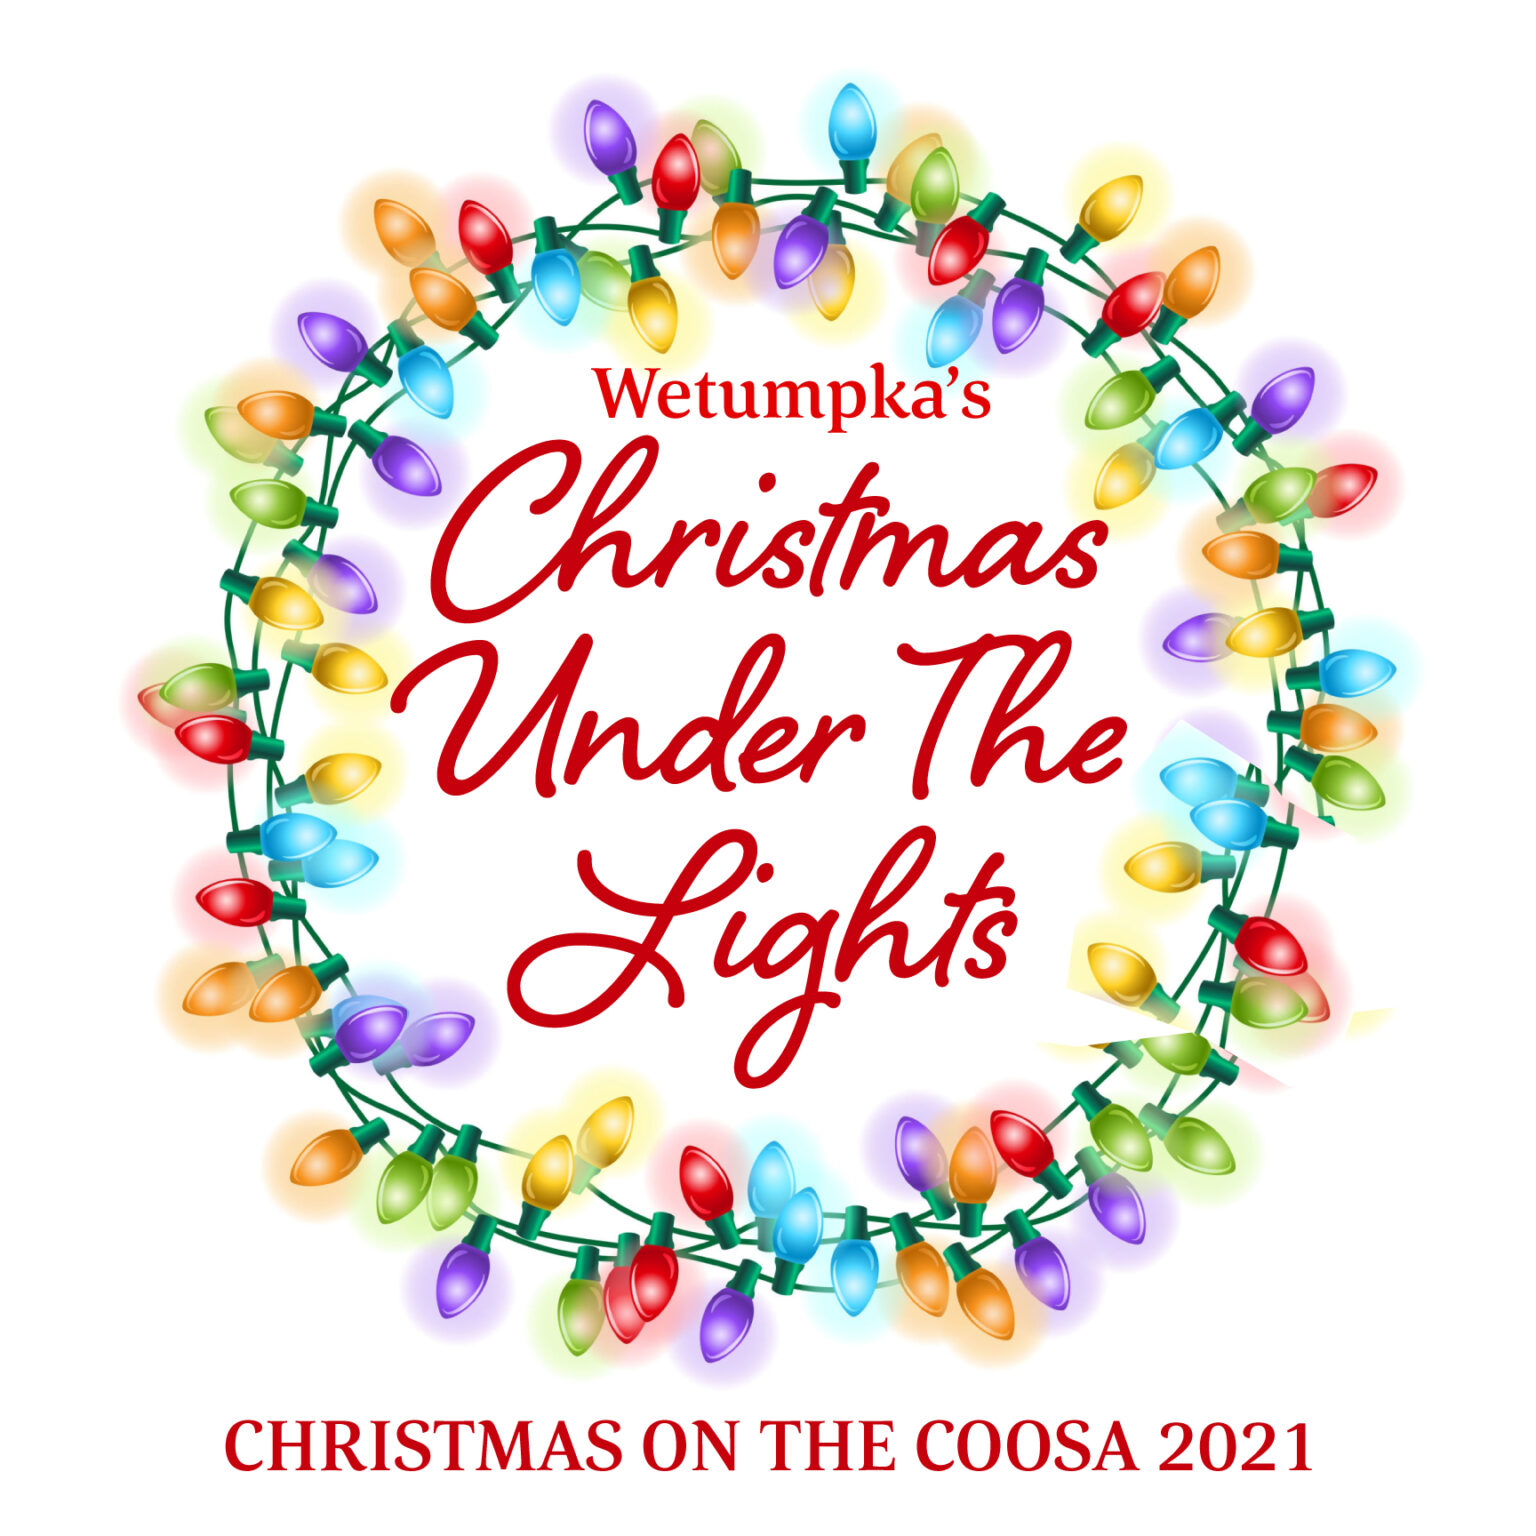 Christmas on the Coosa The City of Wetumpka